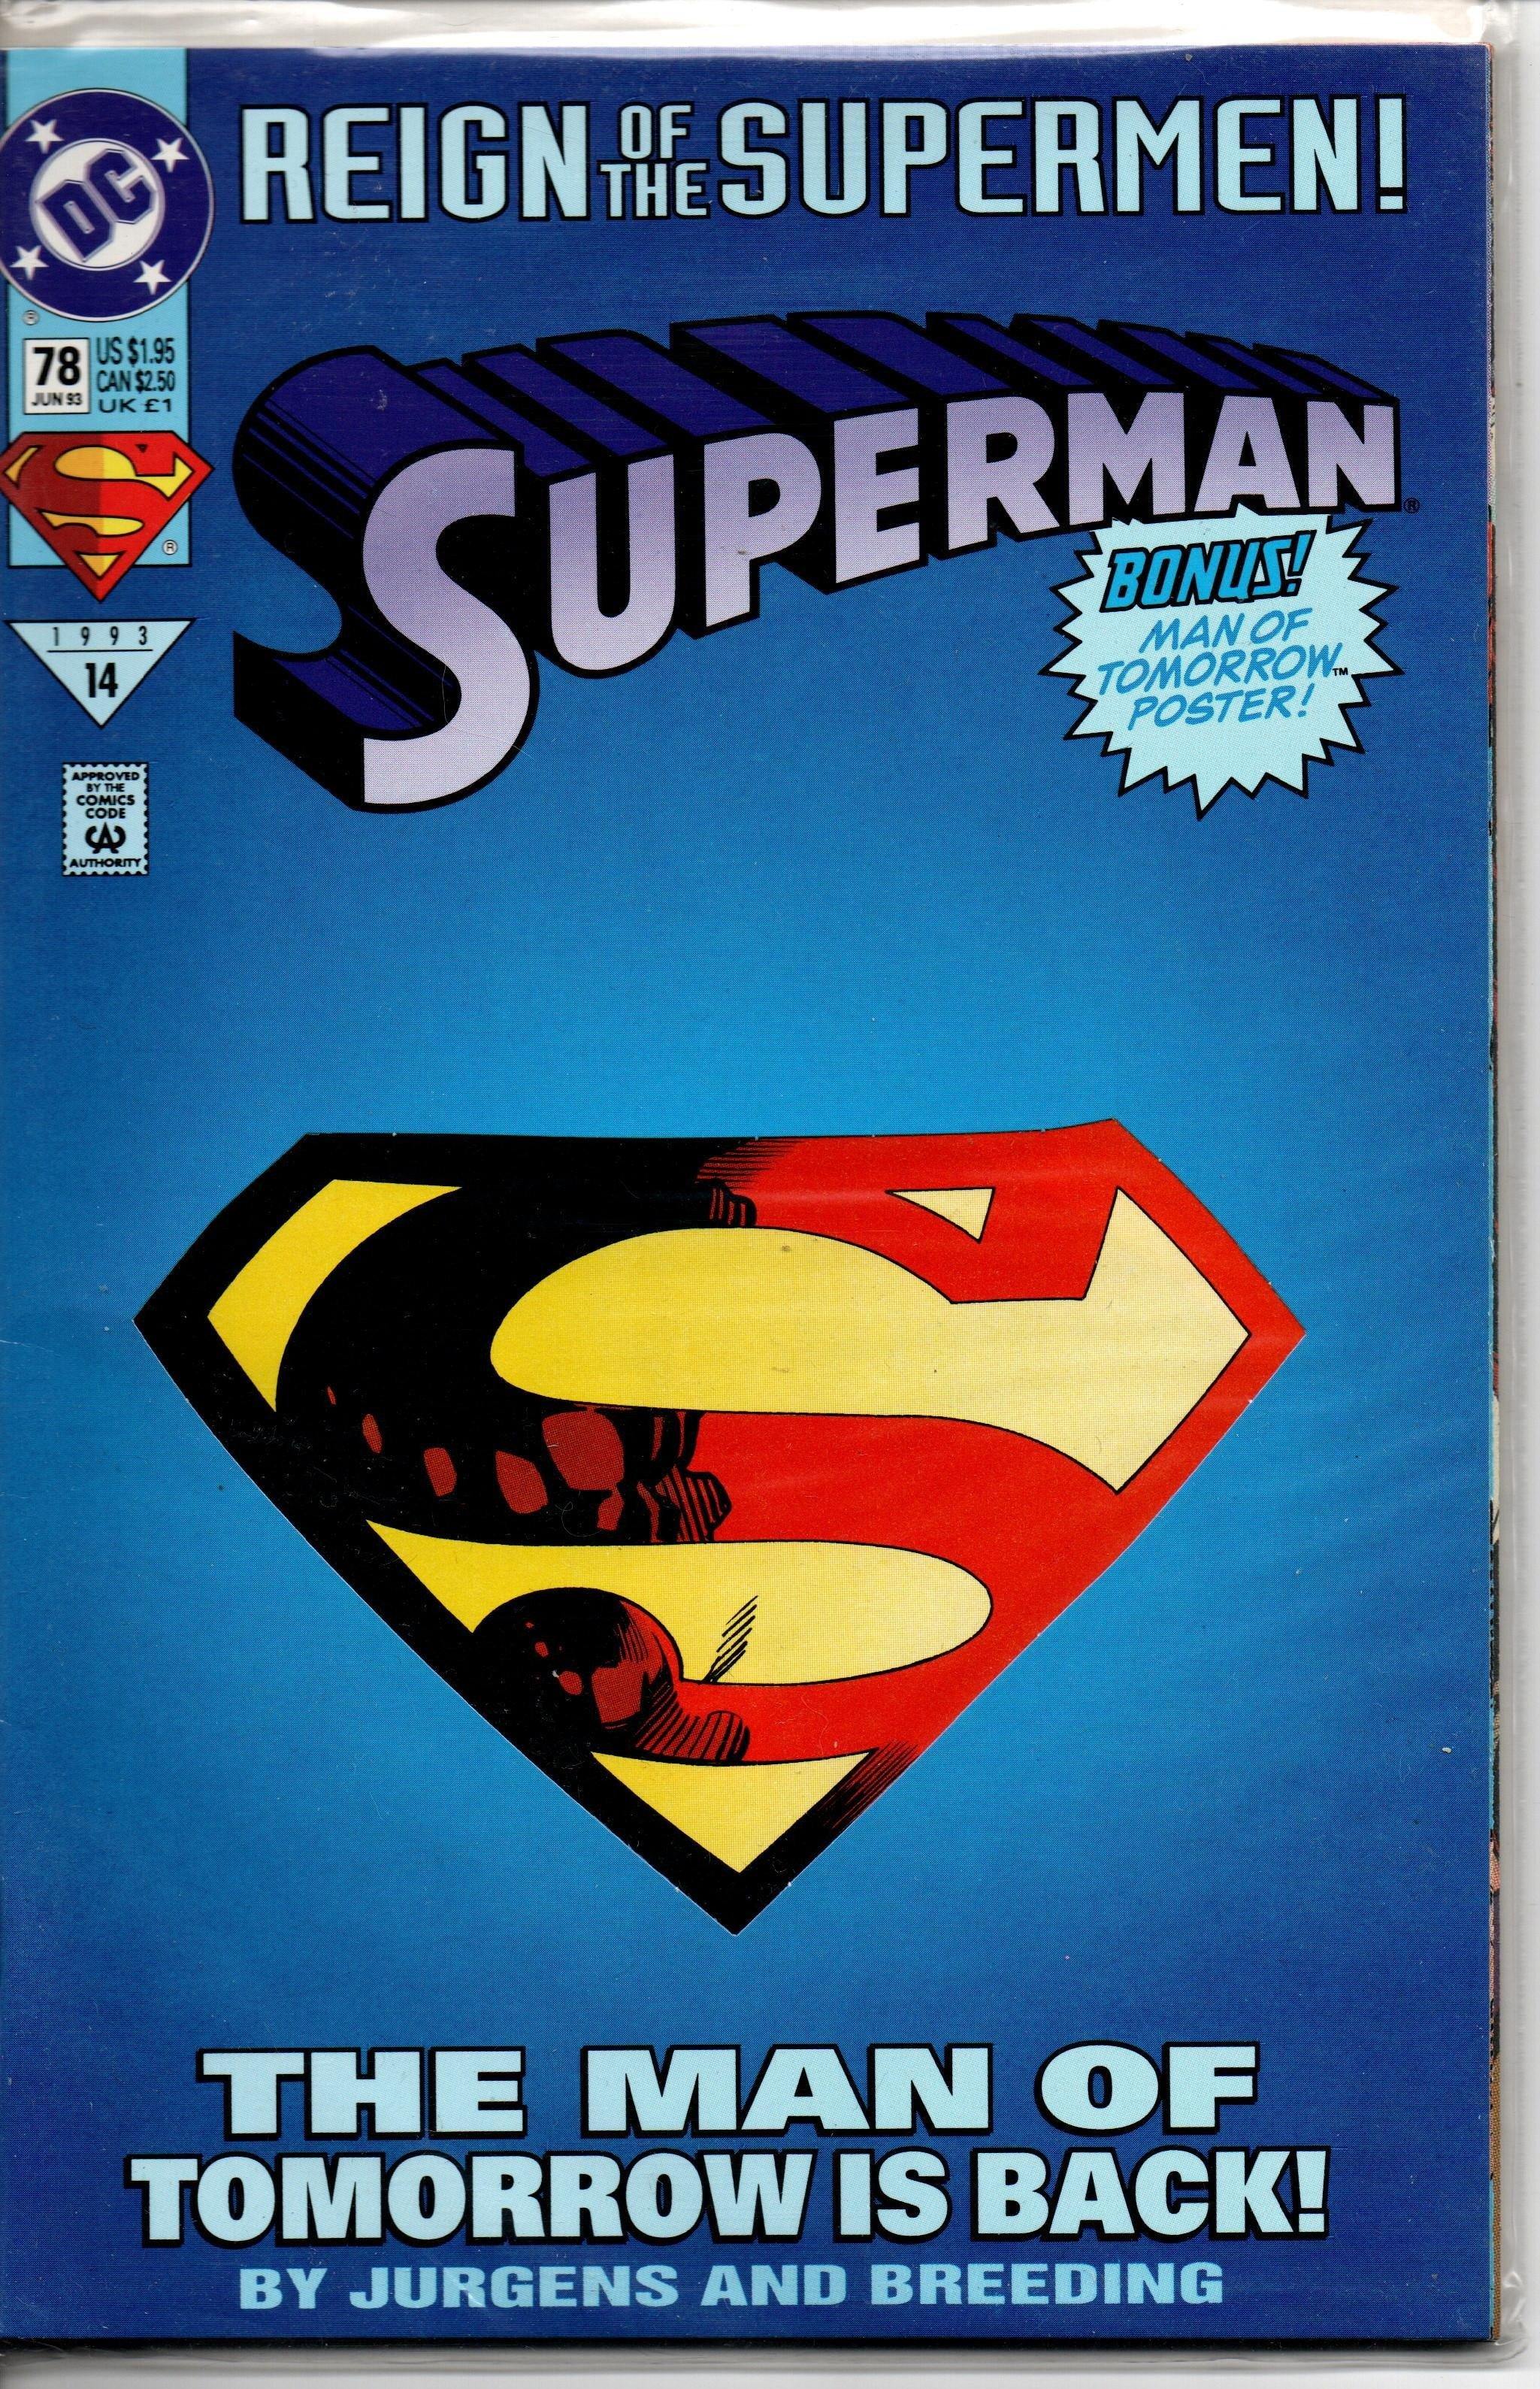 SUPERMAN #78D (2ND SERIES 1987) JUN 1993 WITH SLEVE - CNL.NY